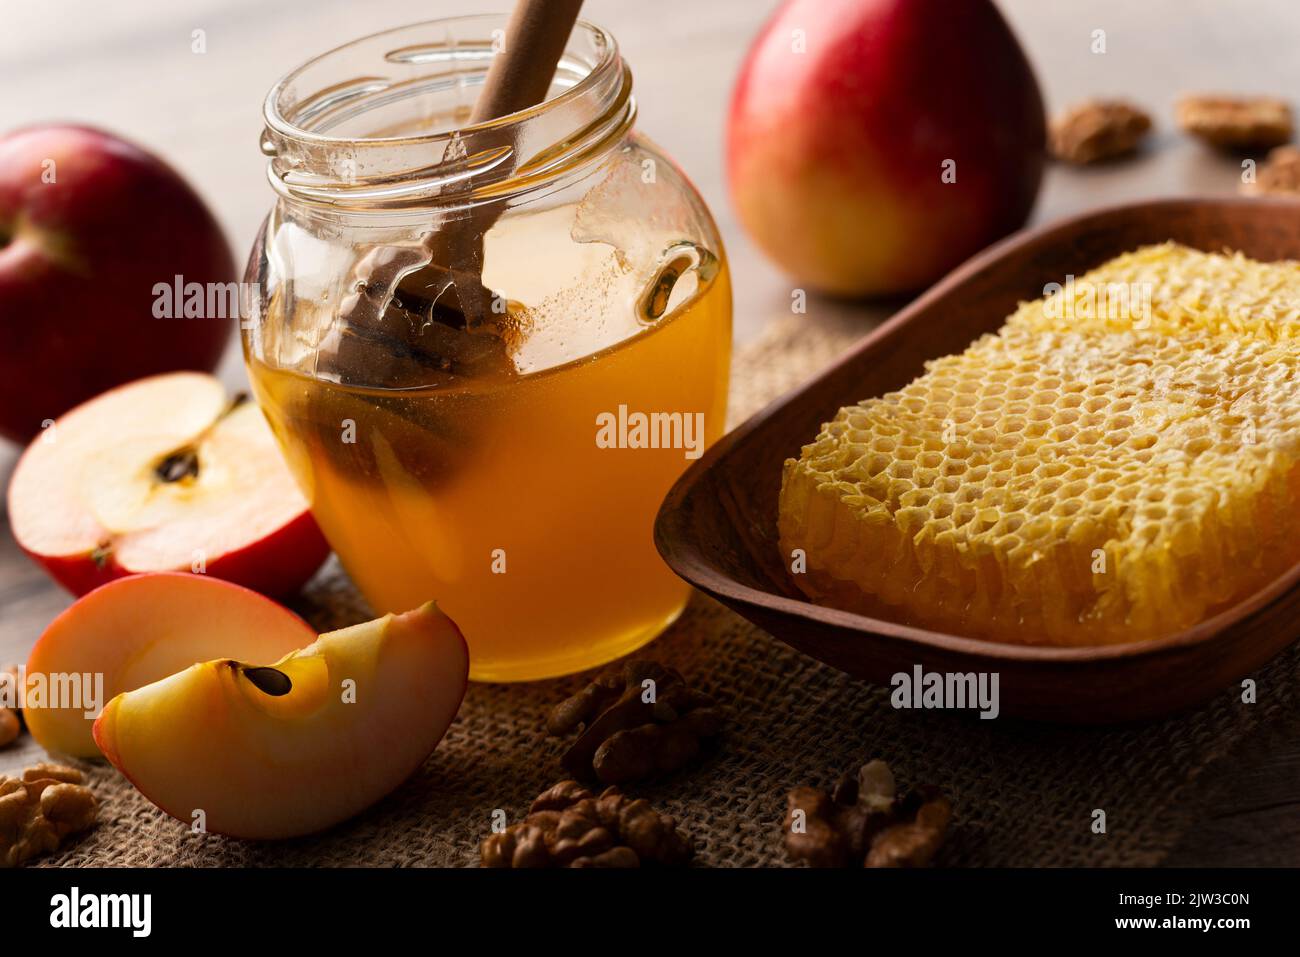 Mason jar with honey, honey dipper, honeycomb, red apples and walnuts on kitchen table Stock Photo